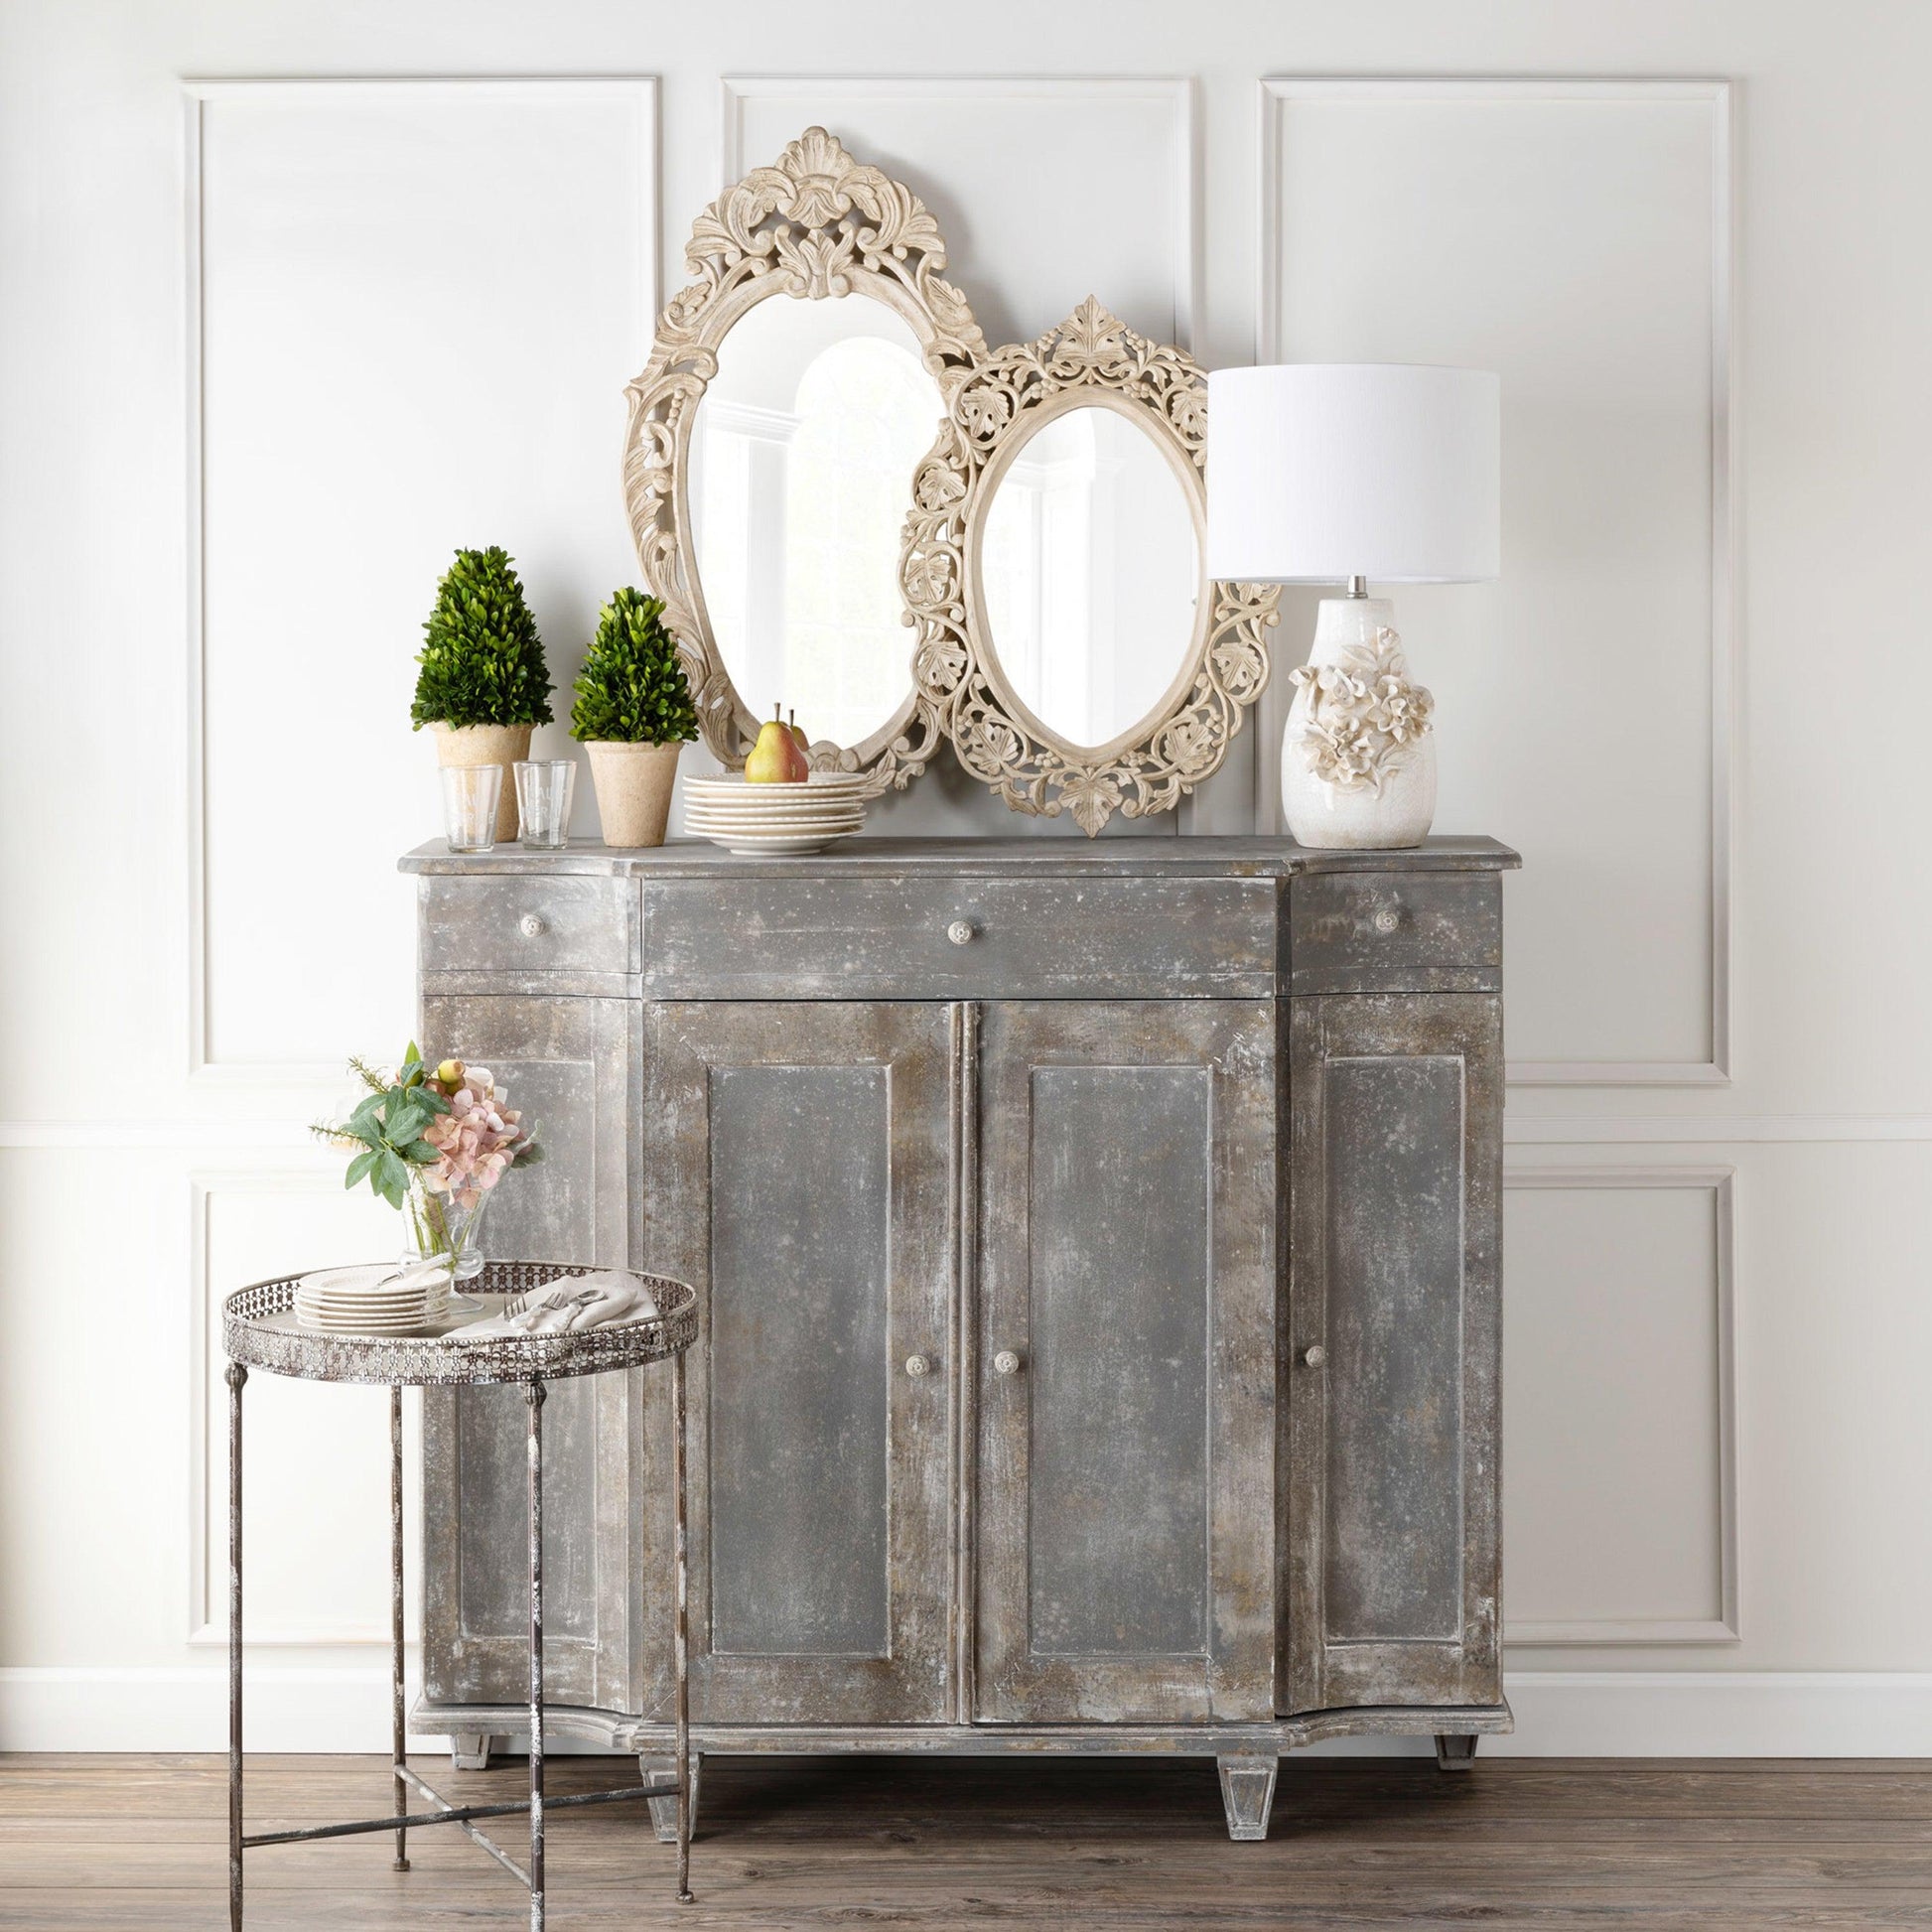 french-country-hand-carved-wood-mirror-large-mirrors-park-hill-2-Threadbare Gypsy Soul